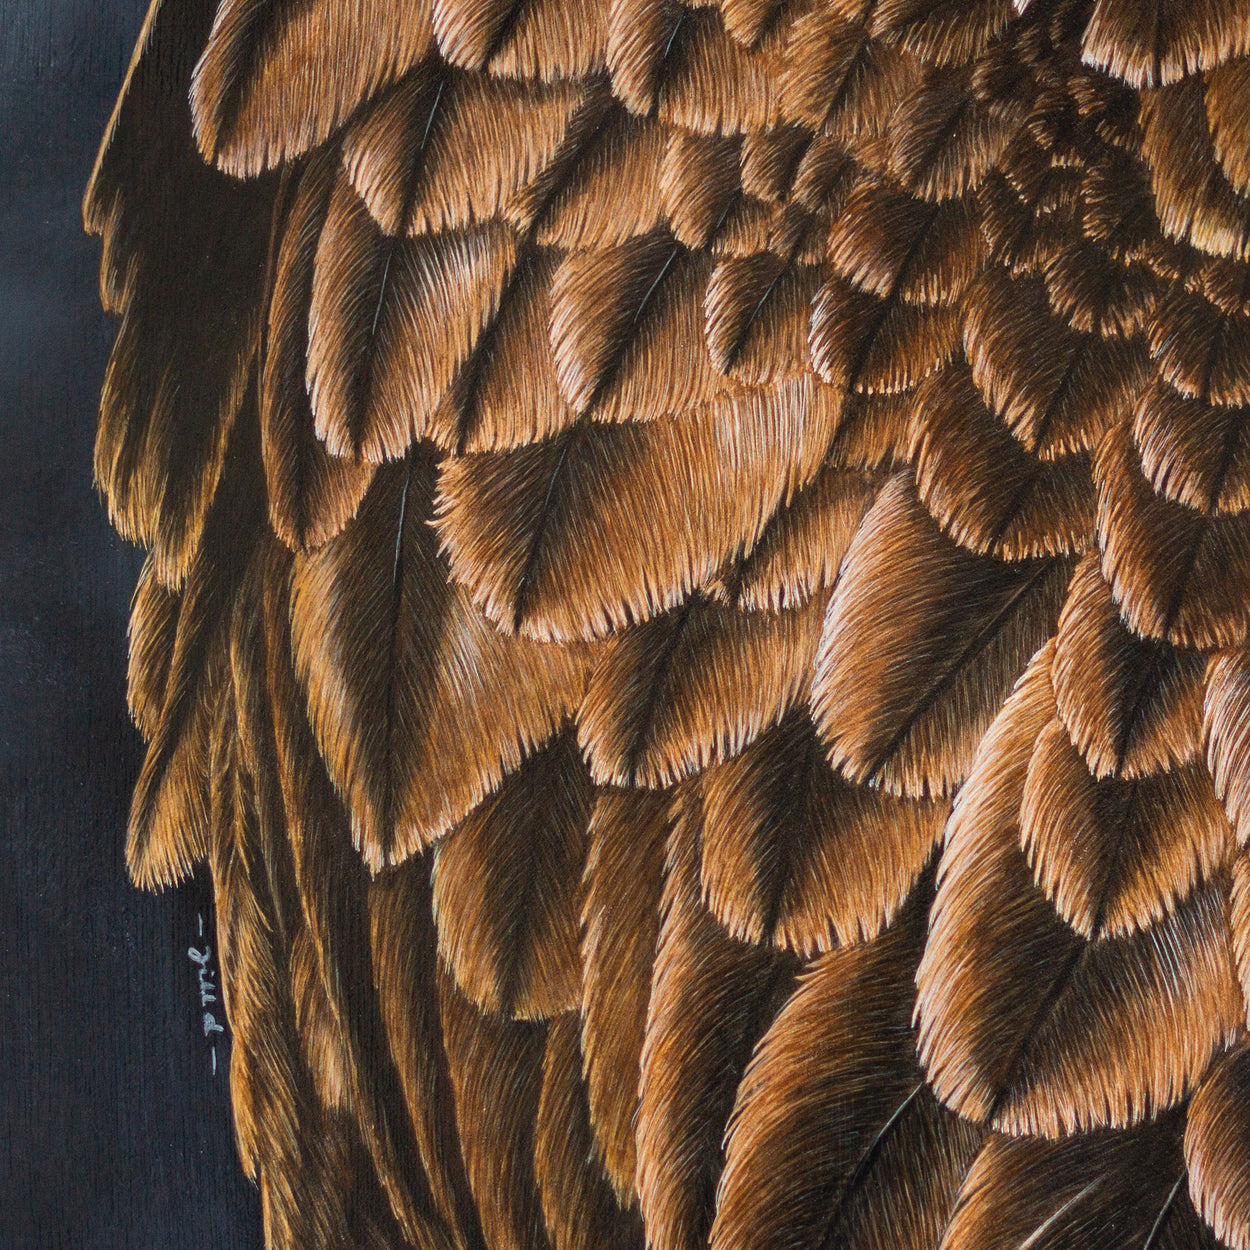 Red Kite Portrait Painting Close-up 4 - Jill Dimond